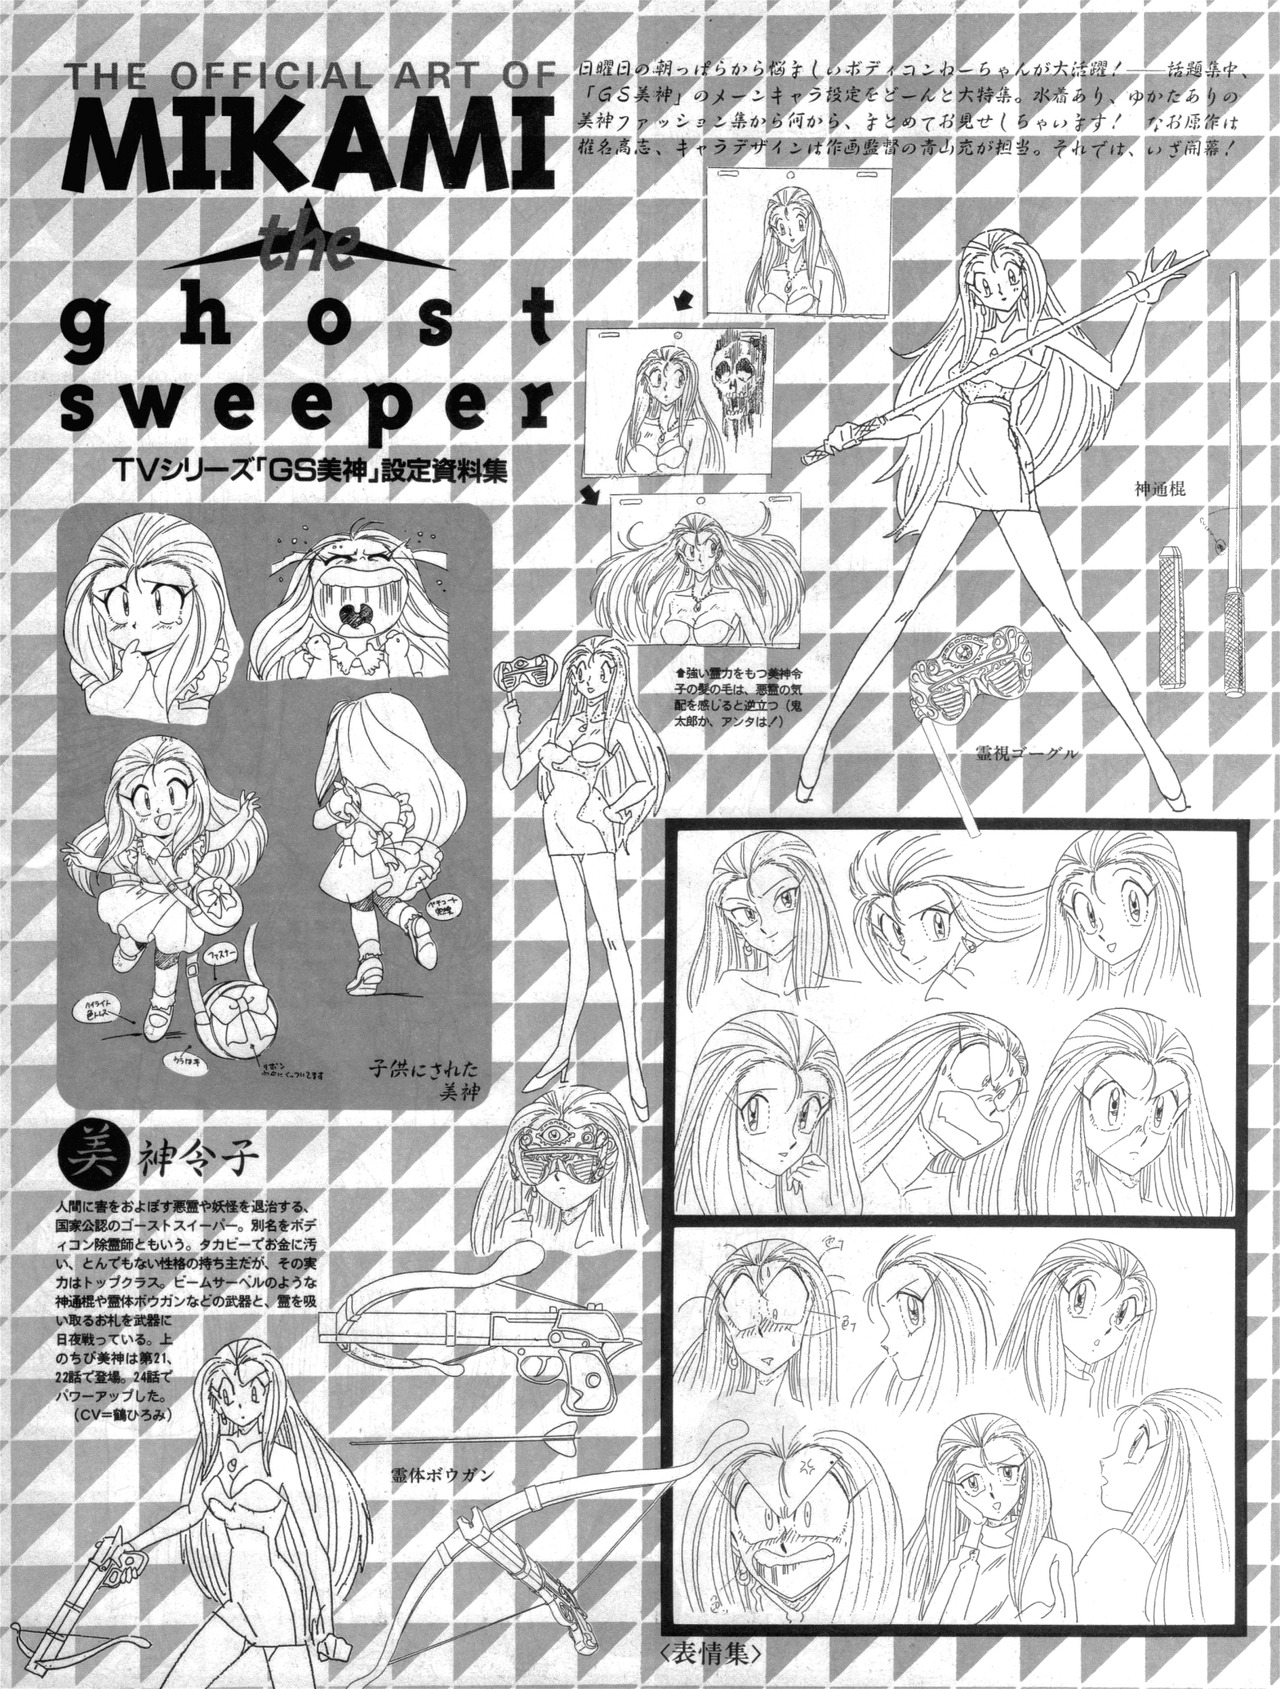 Anim Archive Ghost Sweeper Mikami Newtype 03 1994